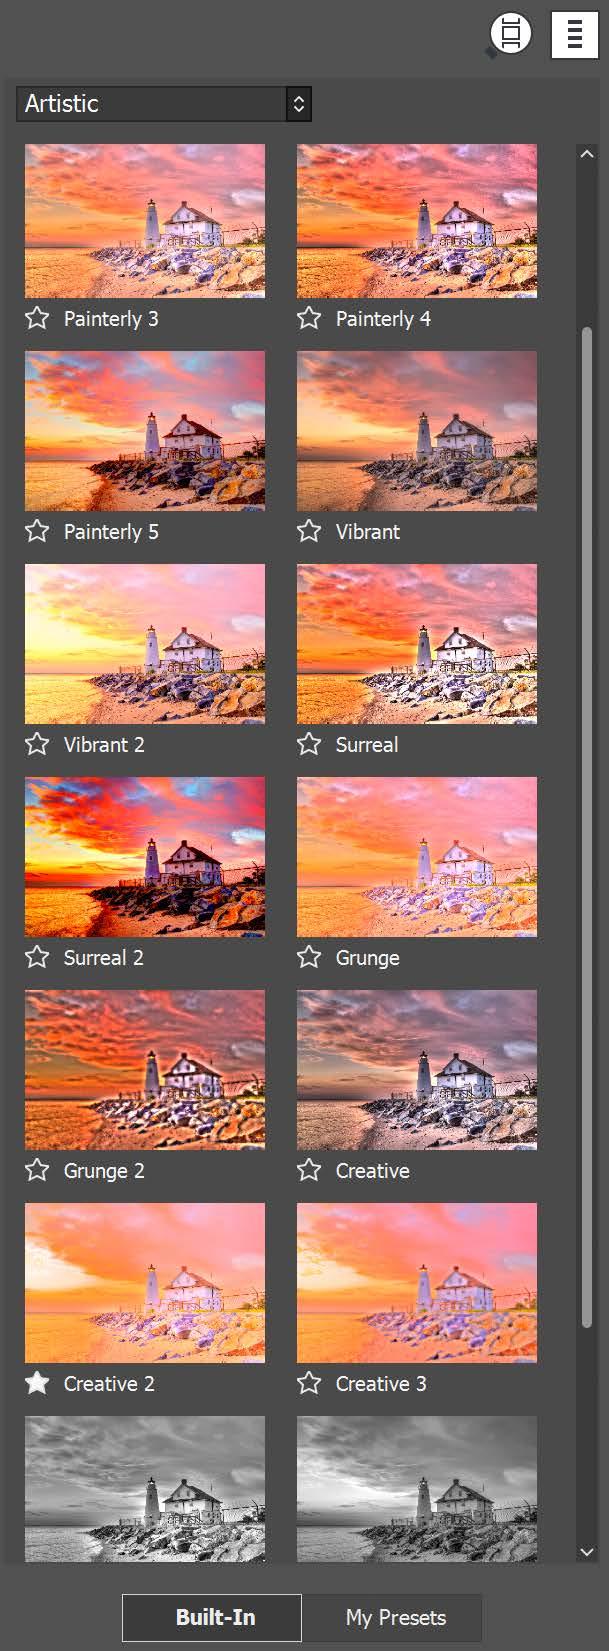 3.3.4 Saving Custom Presets There are two ways to save custom presets as an XMP file for future use: during the image adjustment phase, or after HDR processing is complete.